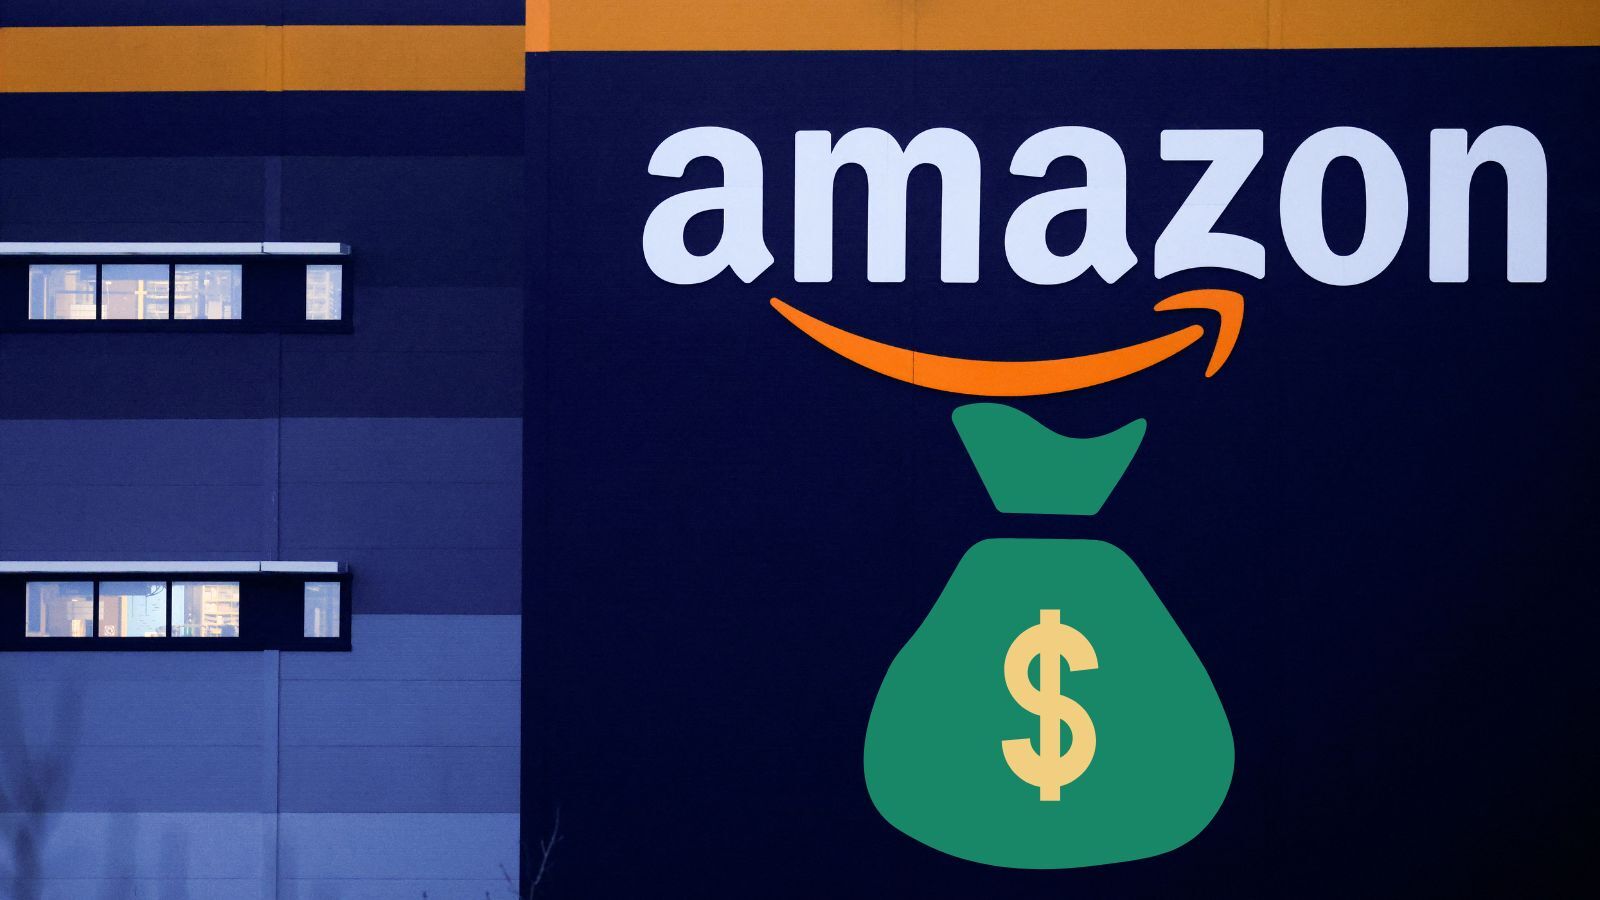 How Much Does Amazon Make? (You're Definitely Interested In That)